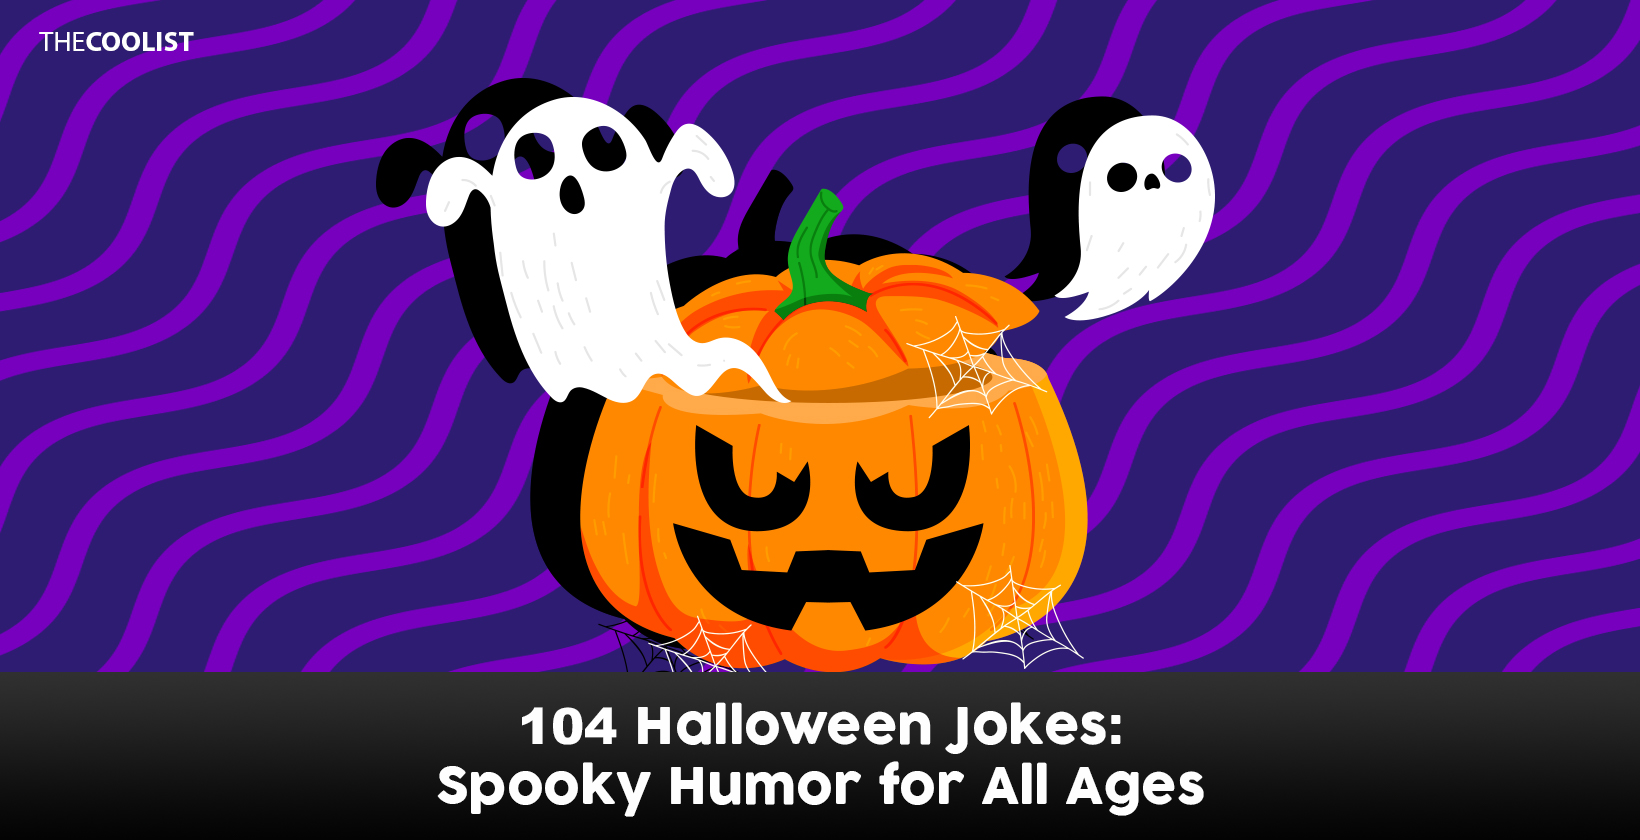 104 Halloween Jokes: Spooky Humor for All Ages